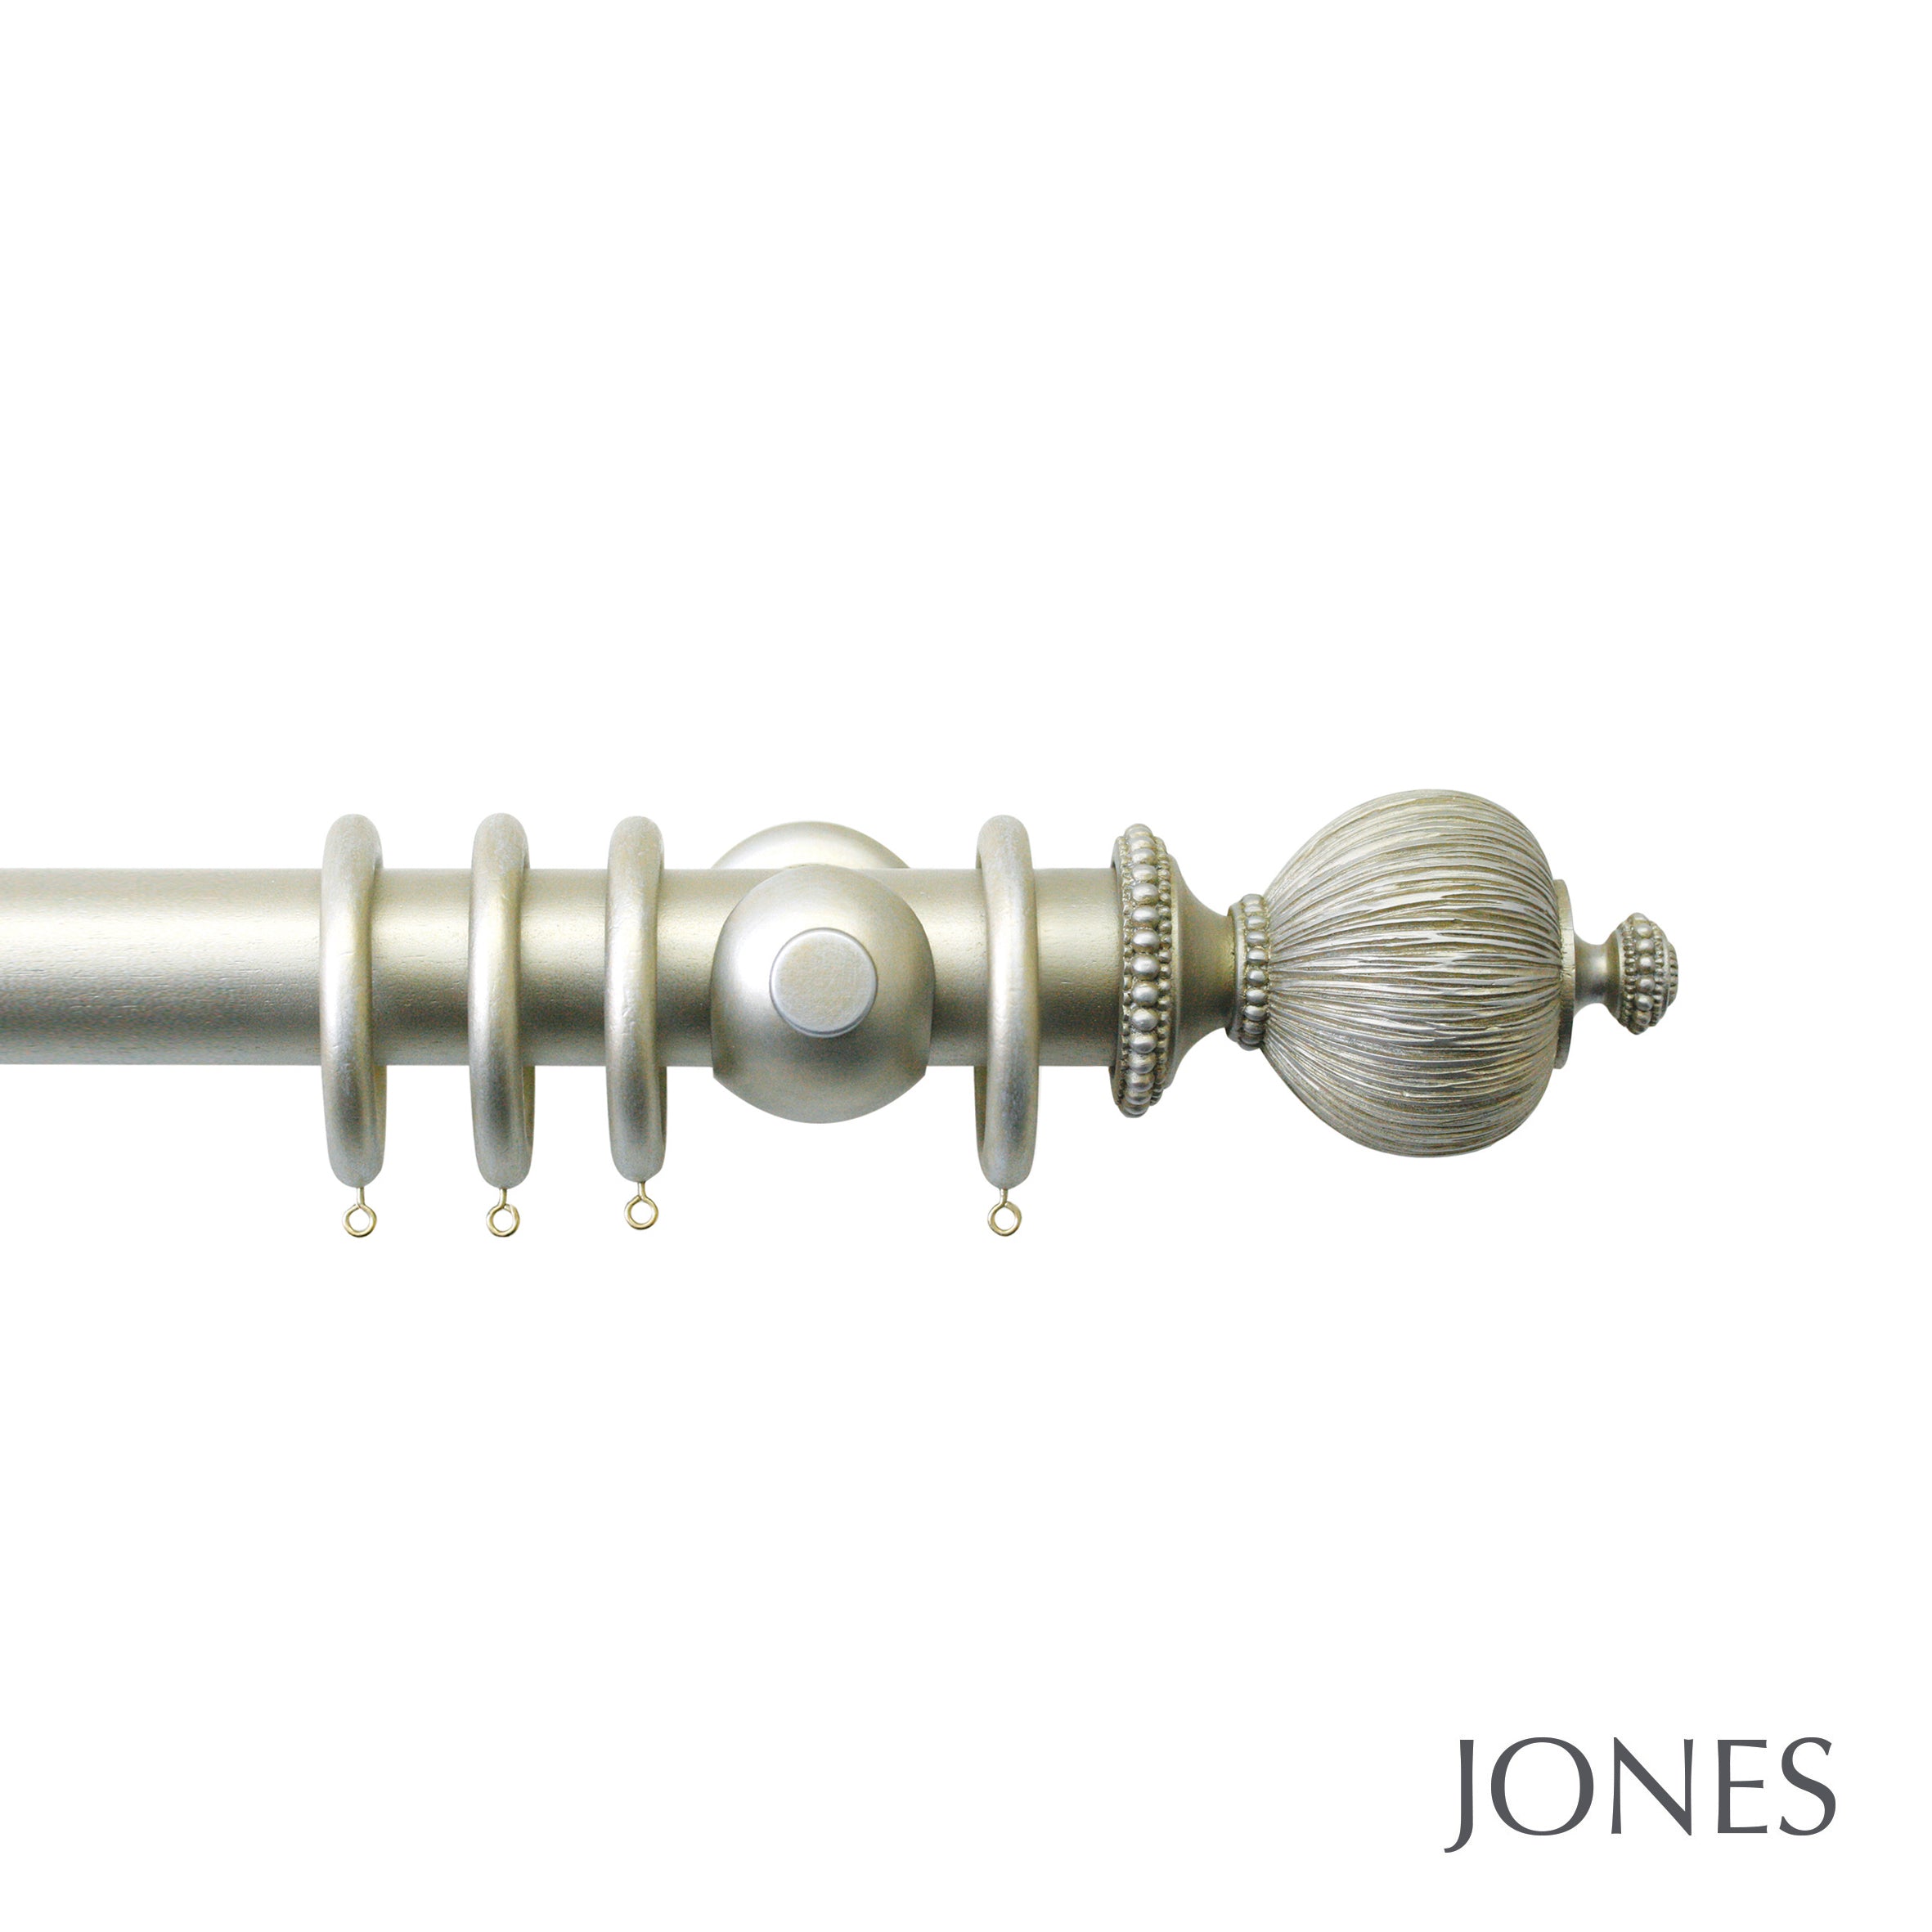 Jones Interiors Florentine Pleated Finial Curtain Pole Set in Champagne Silver